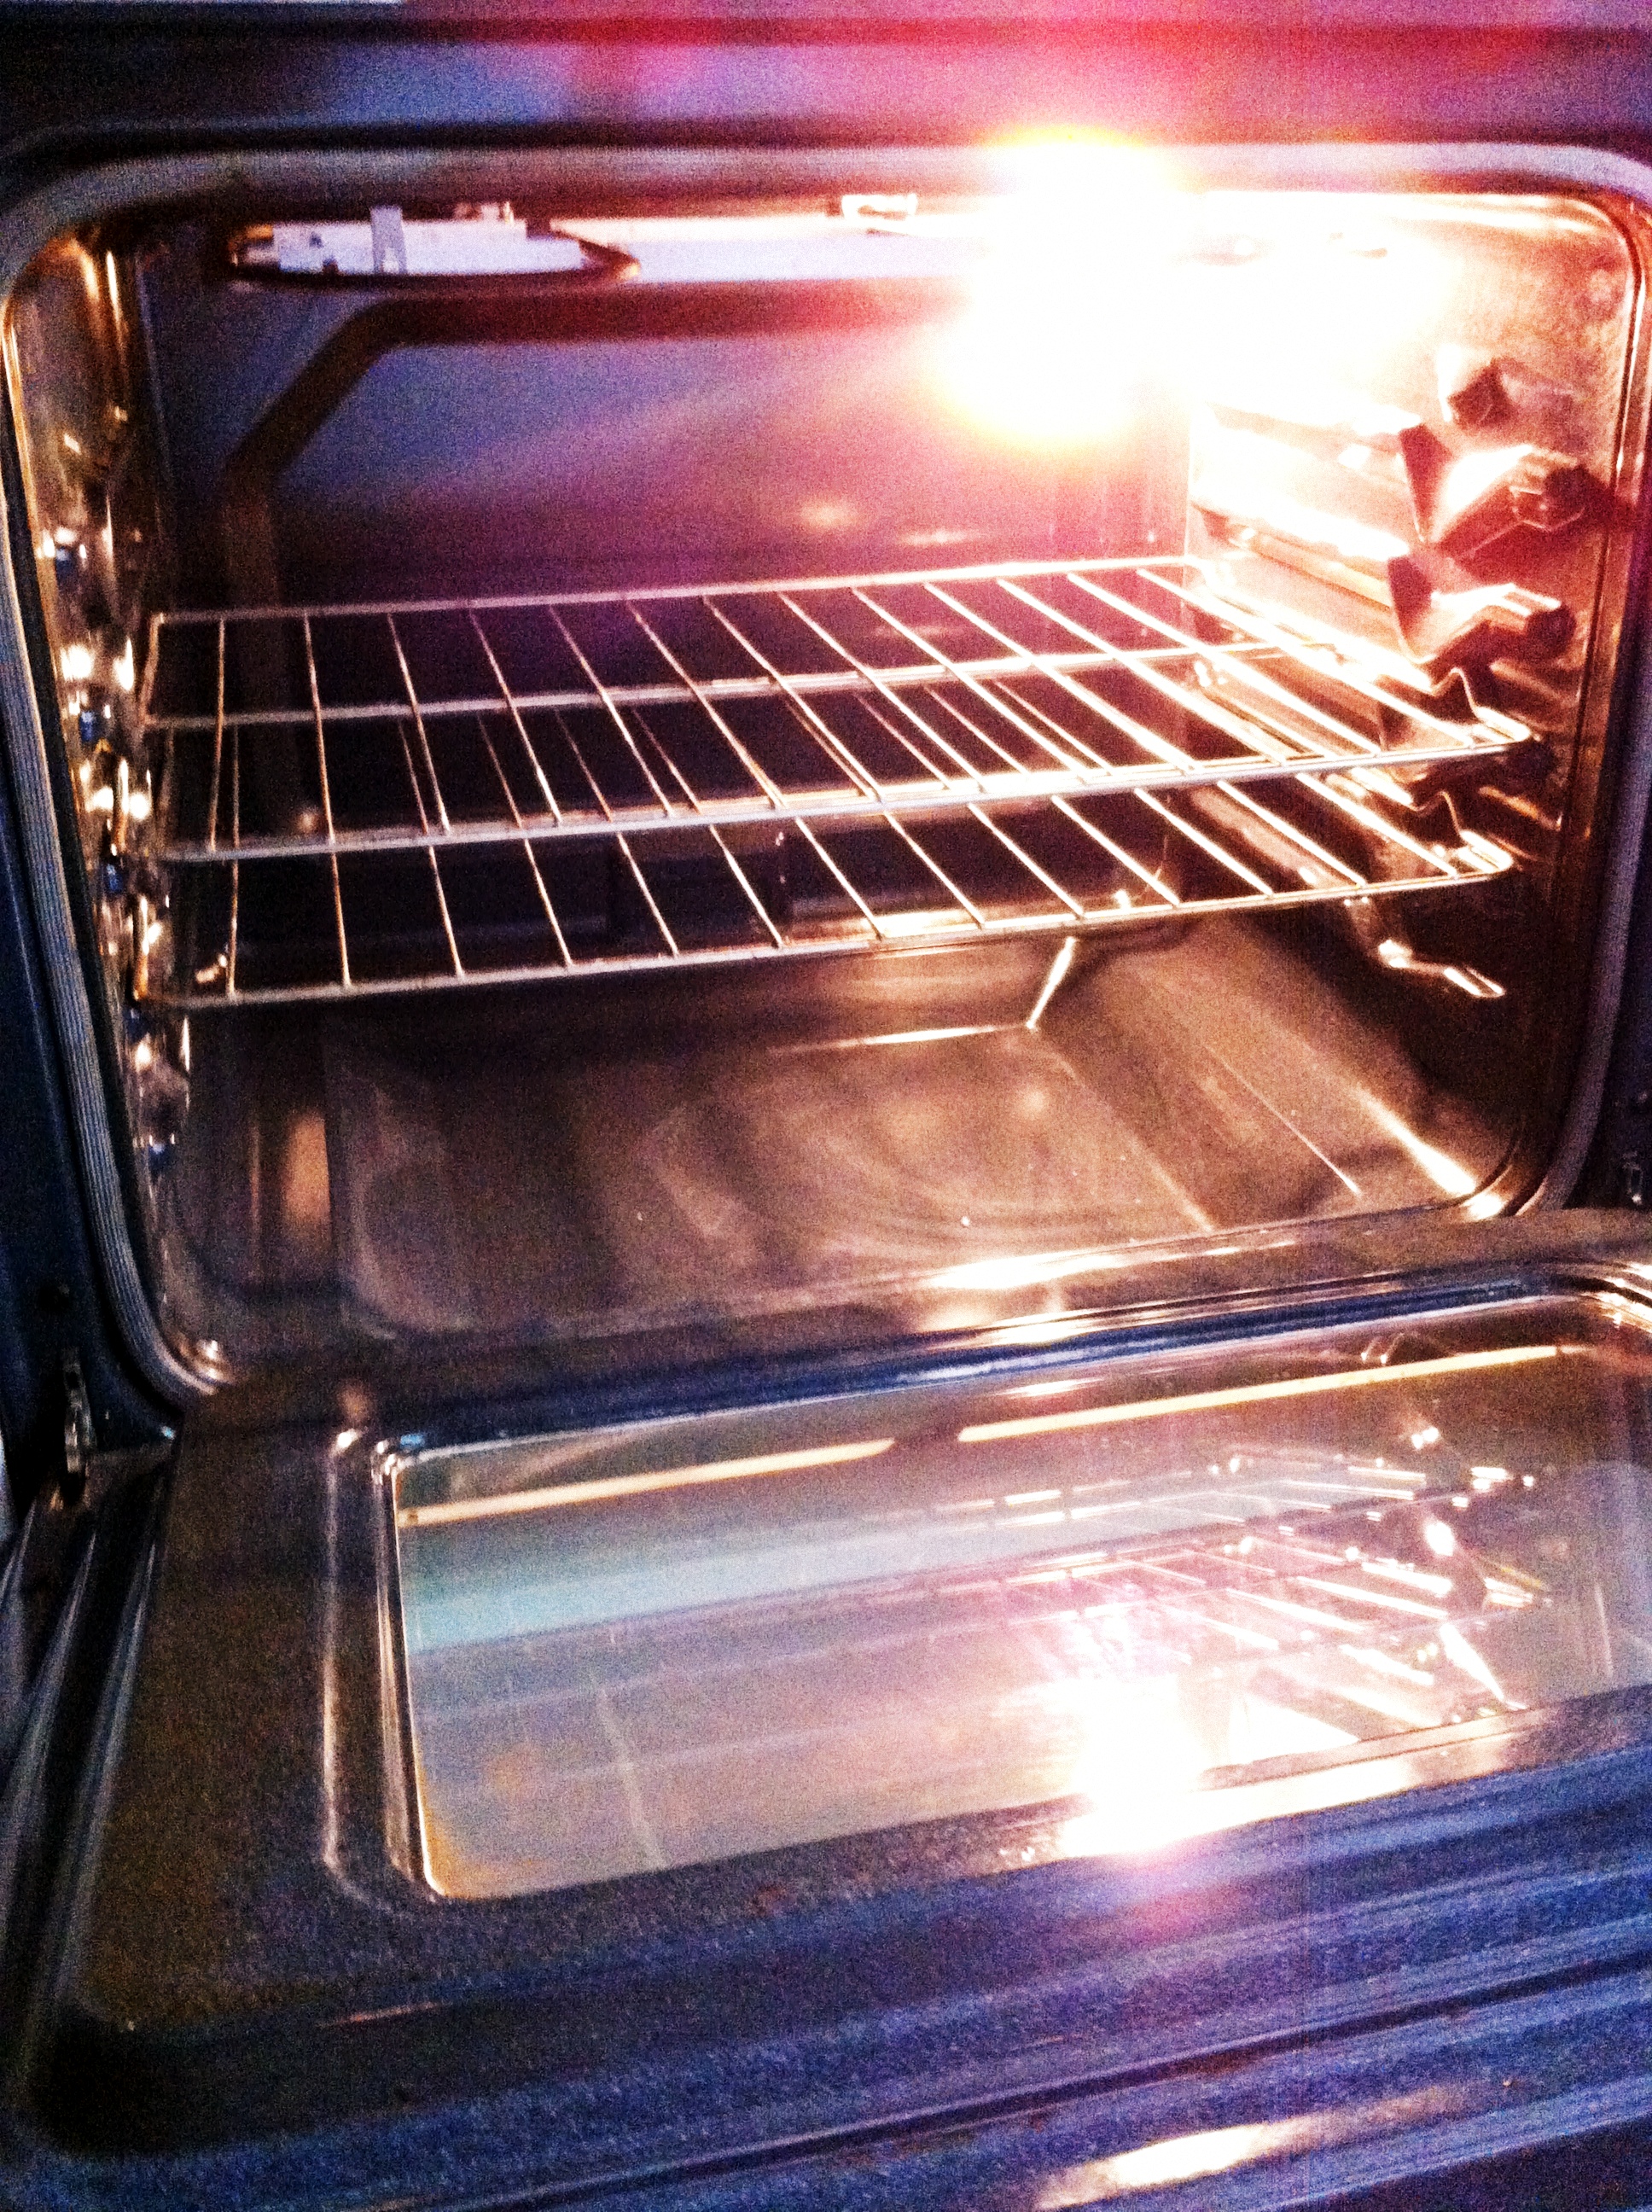 Cleaning your ovenwith magic! (AKA baking soda and dryer sheets